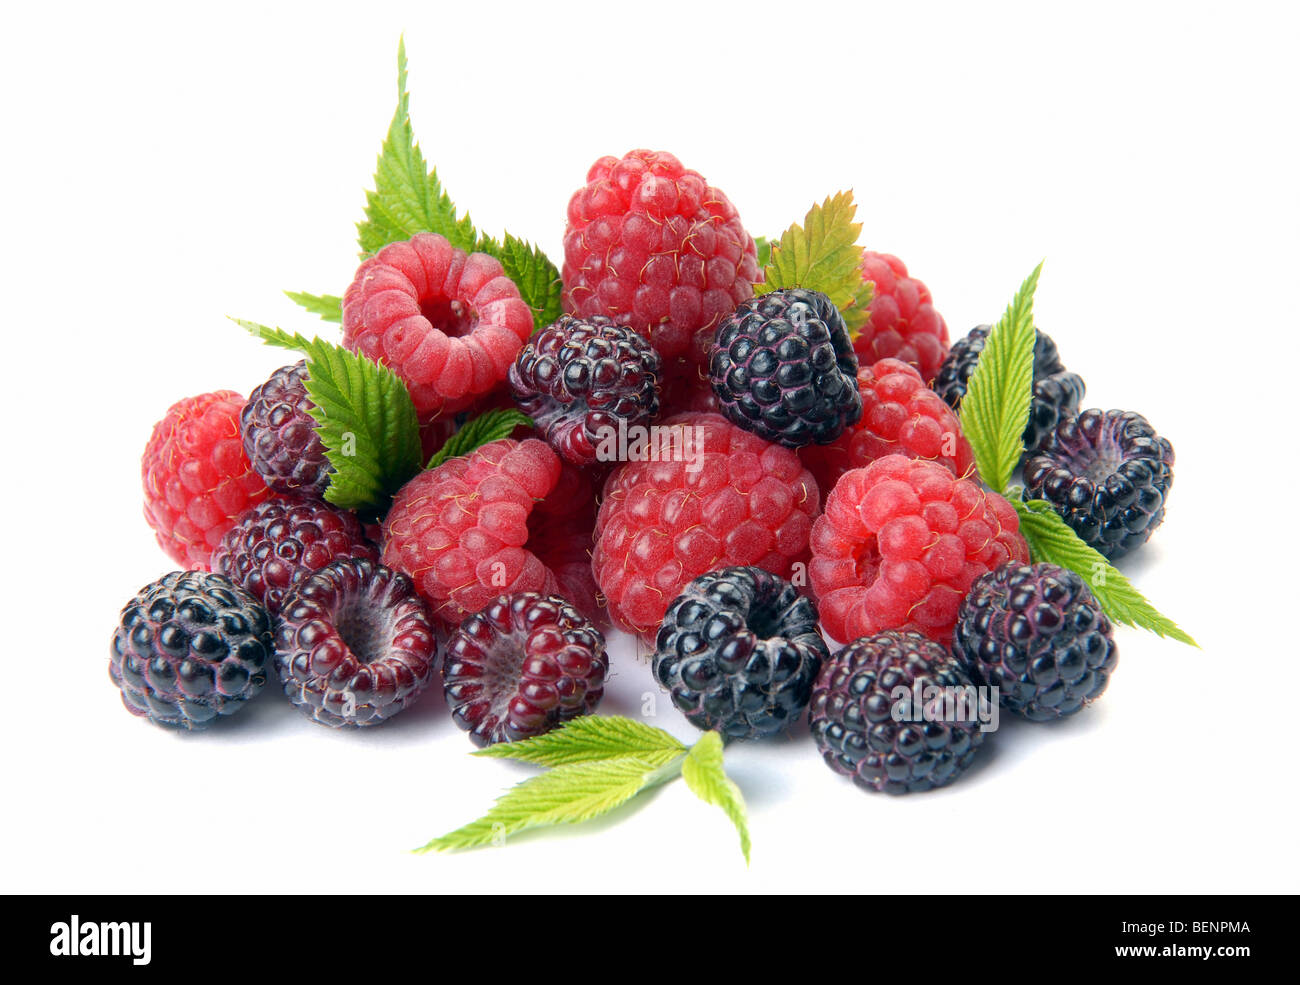 Red and black raspberry with leaves on a white background Stock Photo